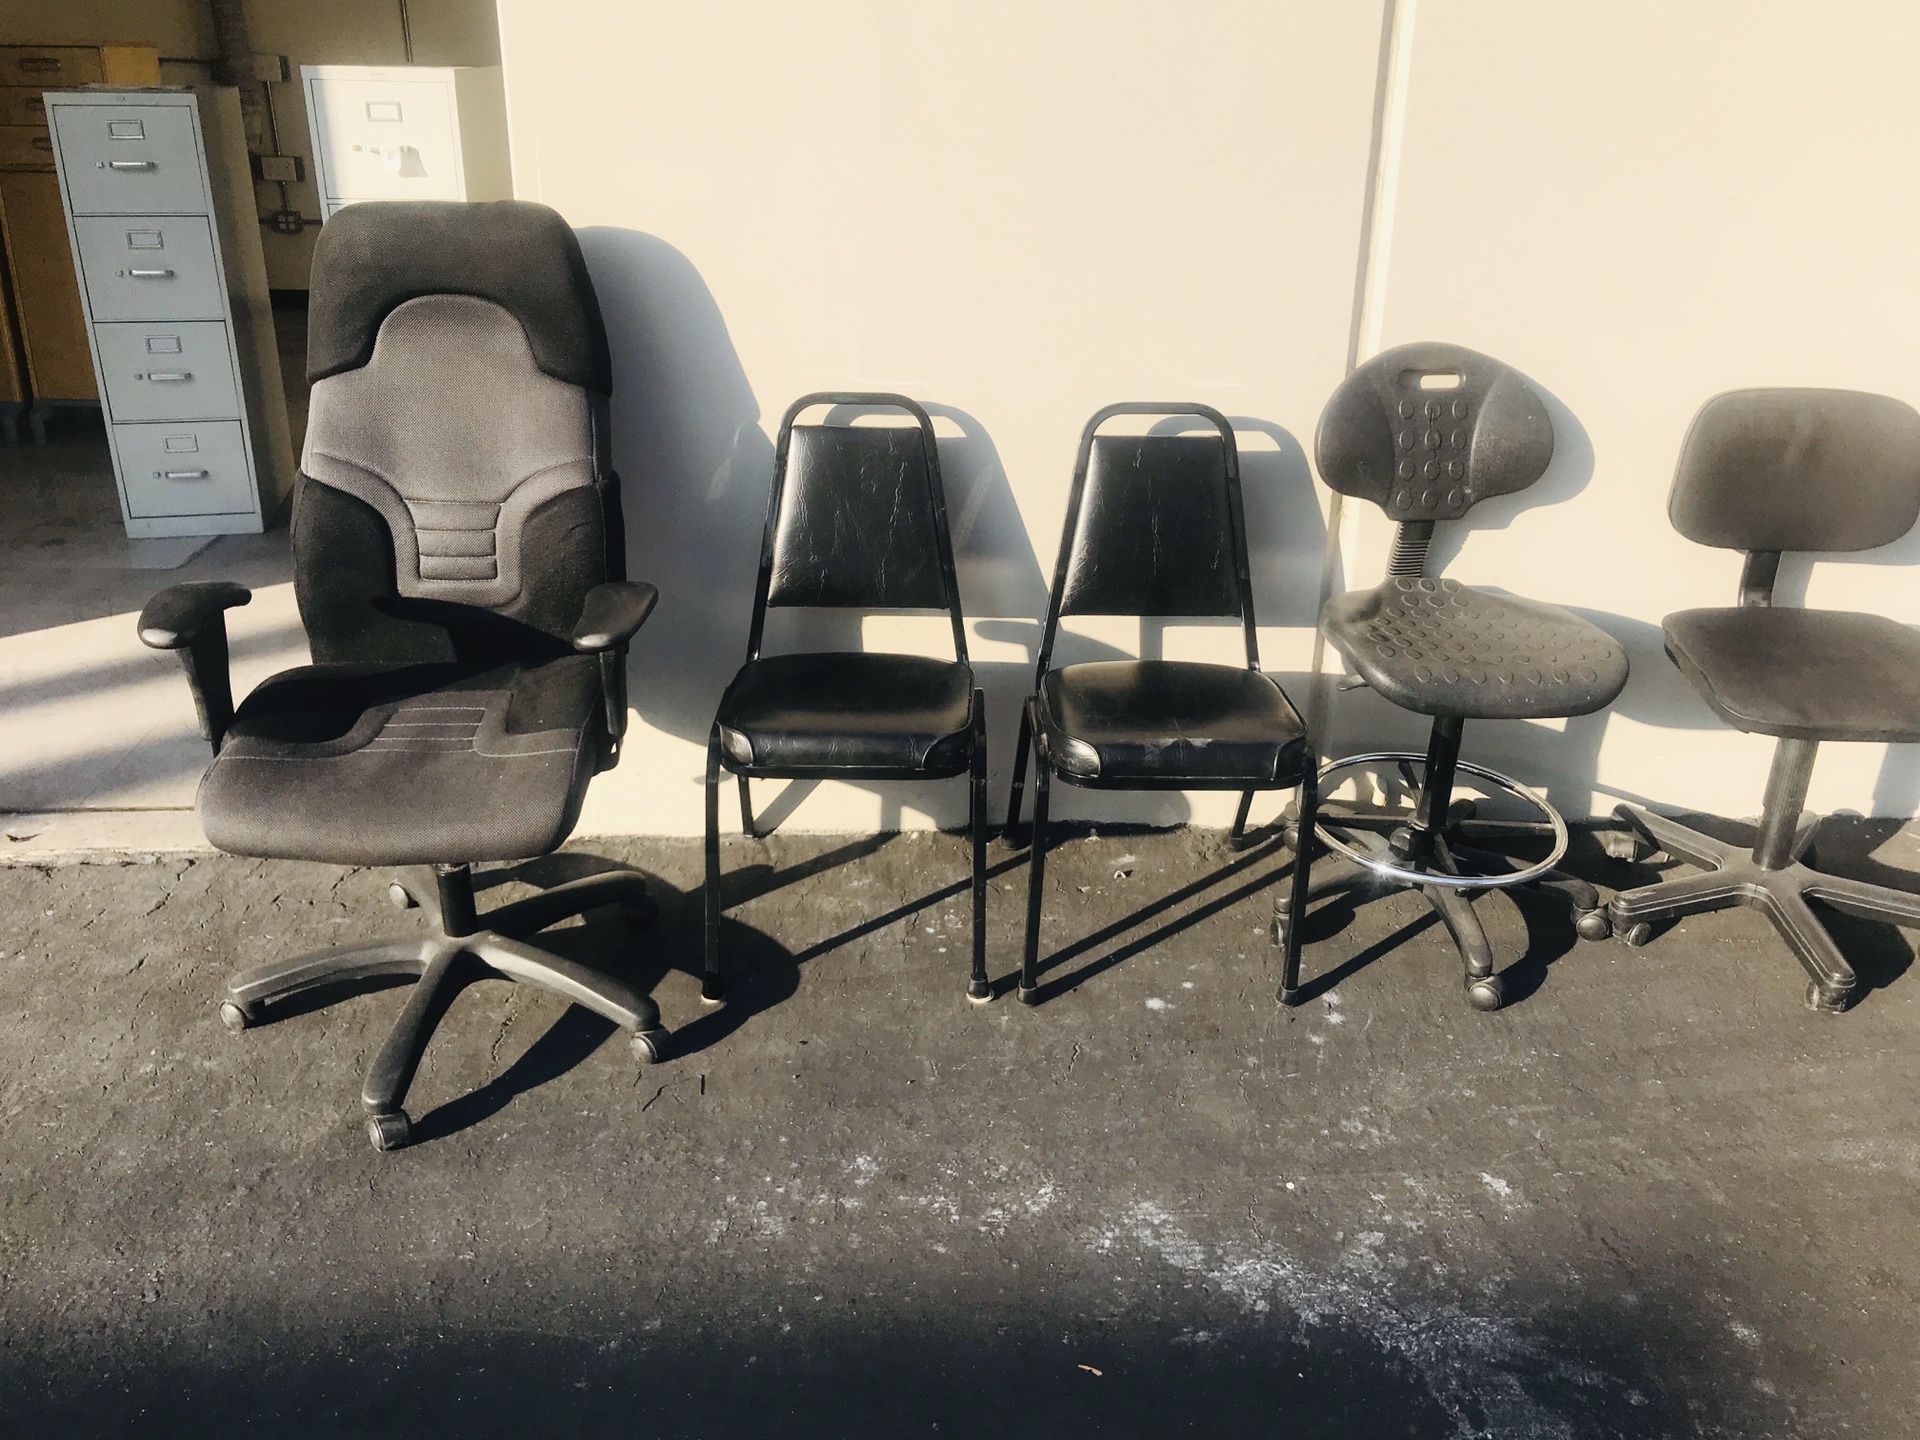 MOVING. 5 used office chairs for free. They are in the back of my building. 7052 Orangewood Ave Unit A 8. Garden grove